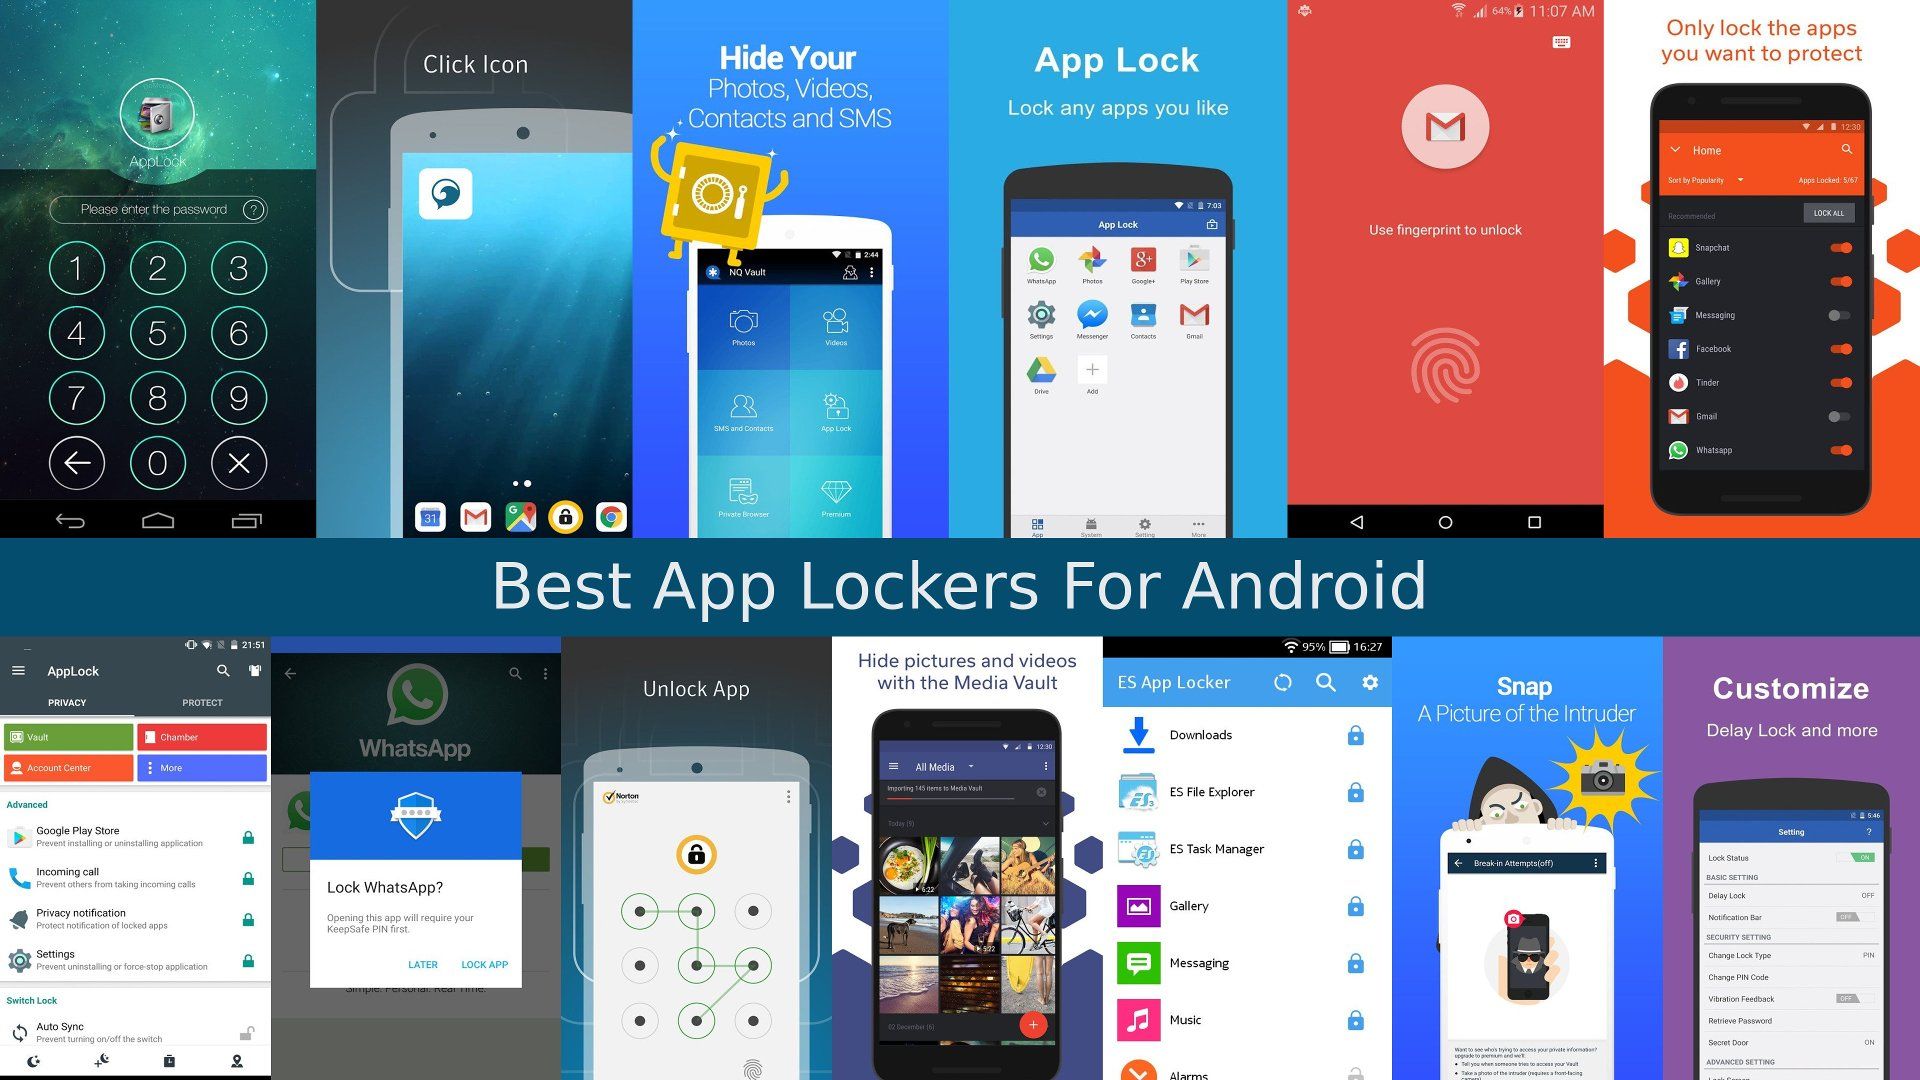 Best App Lockers For Android